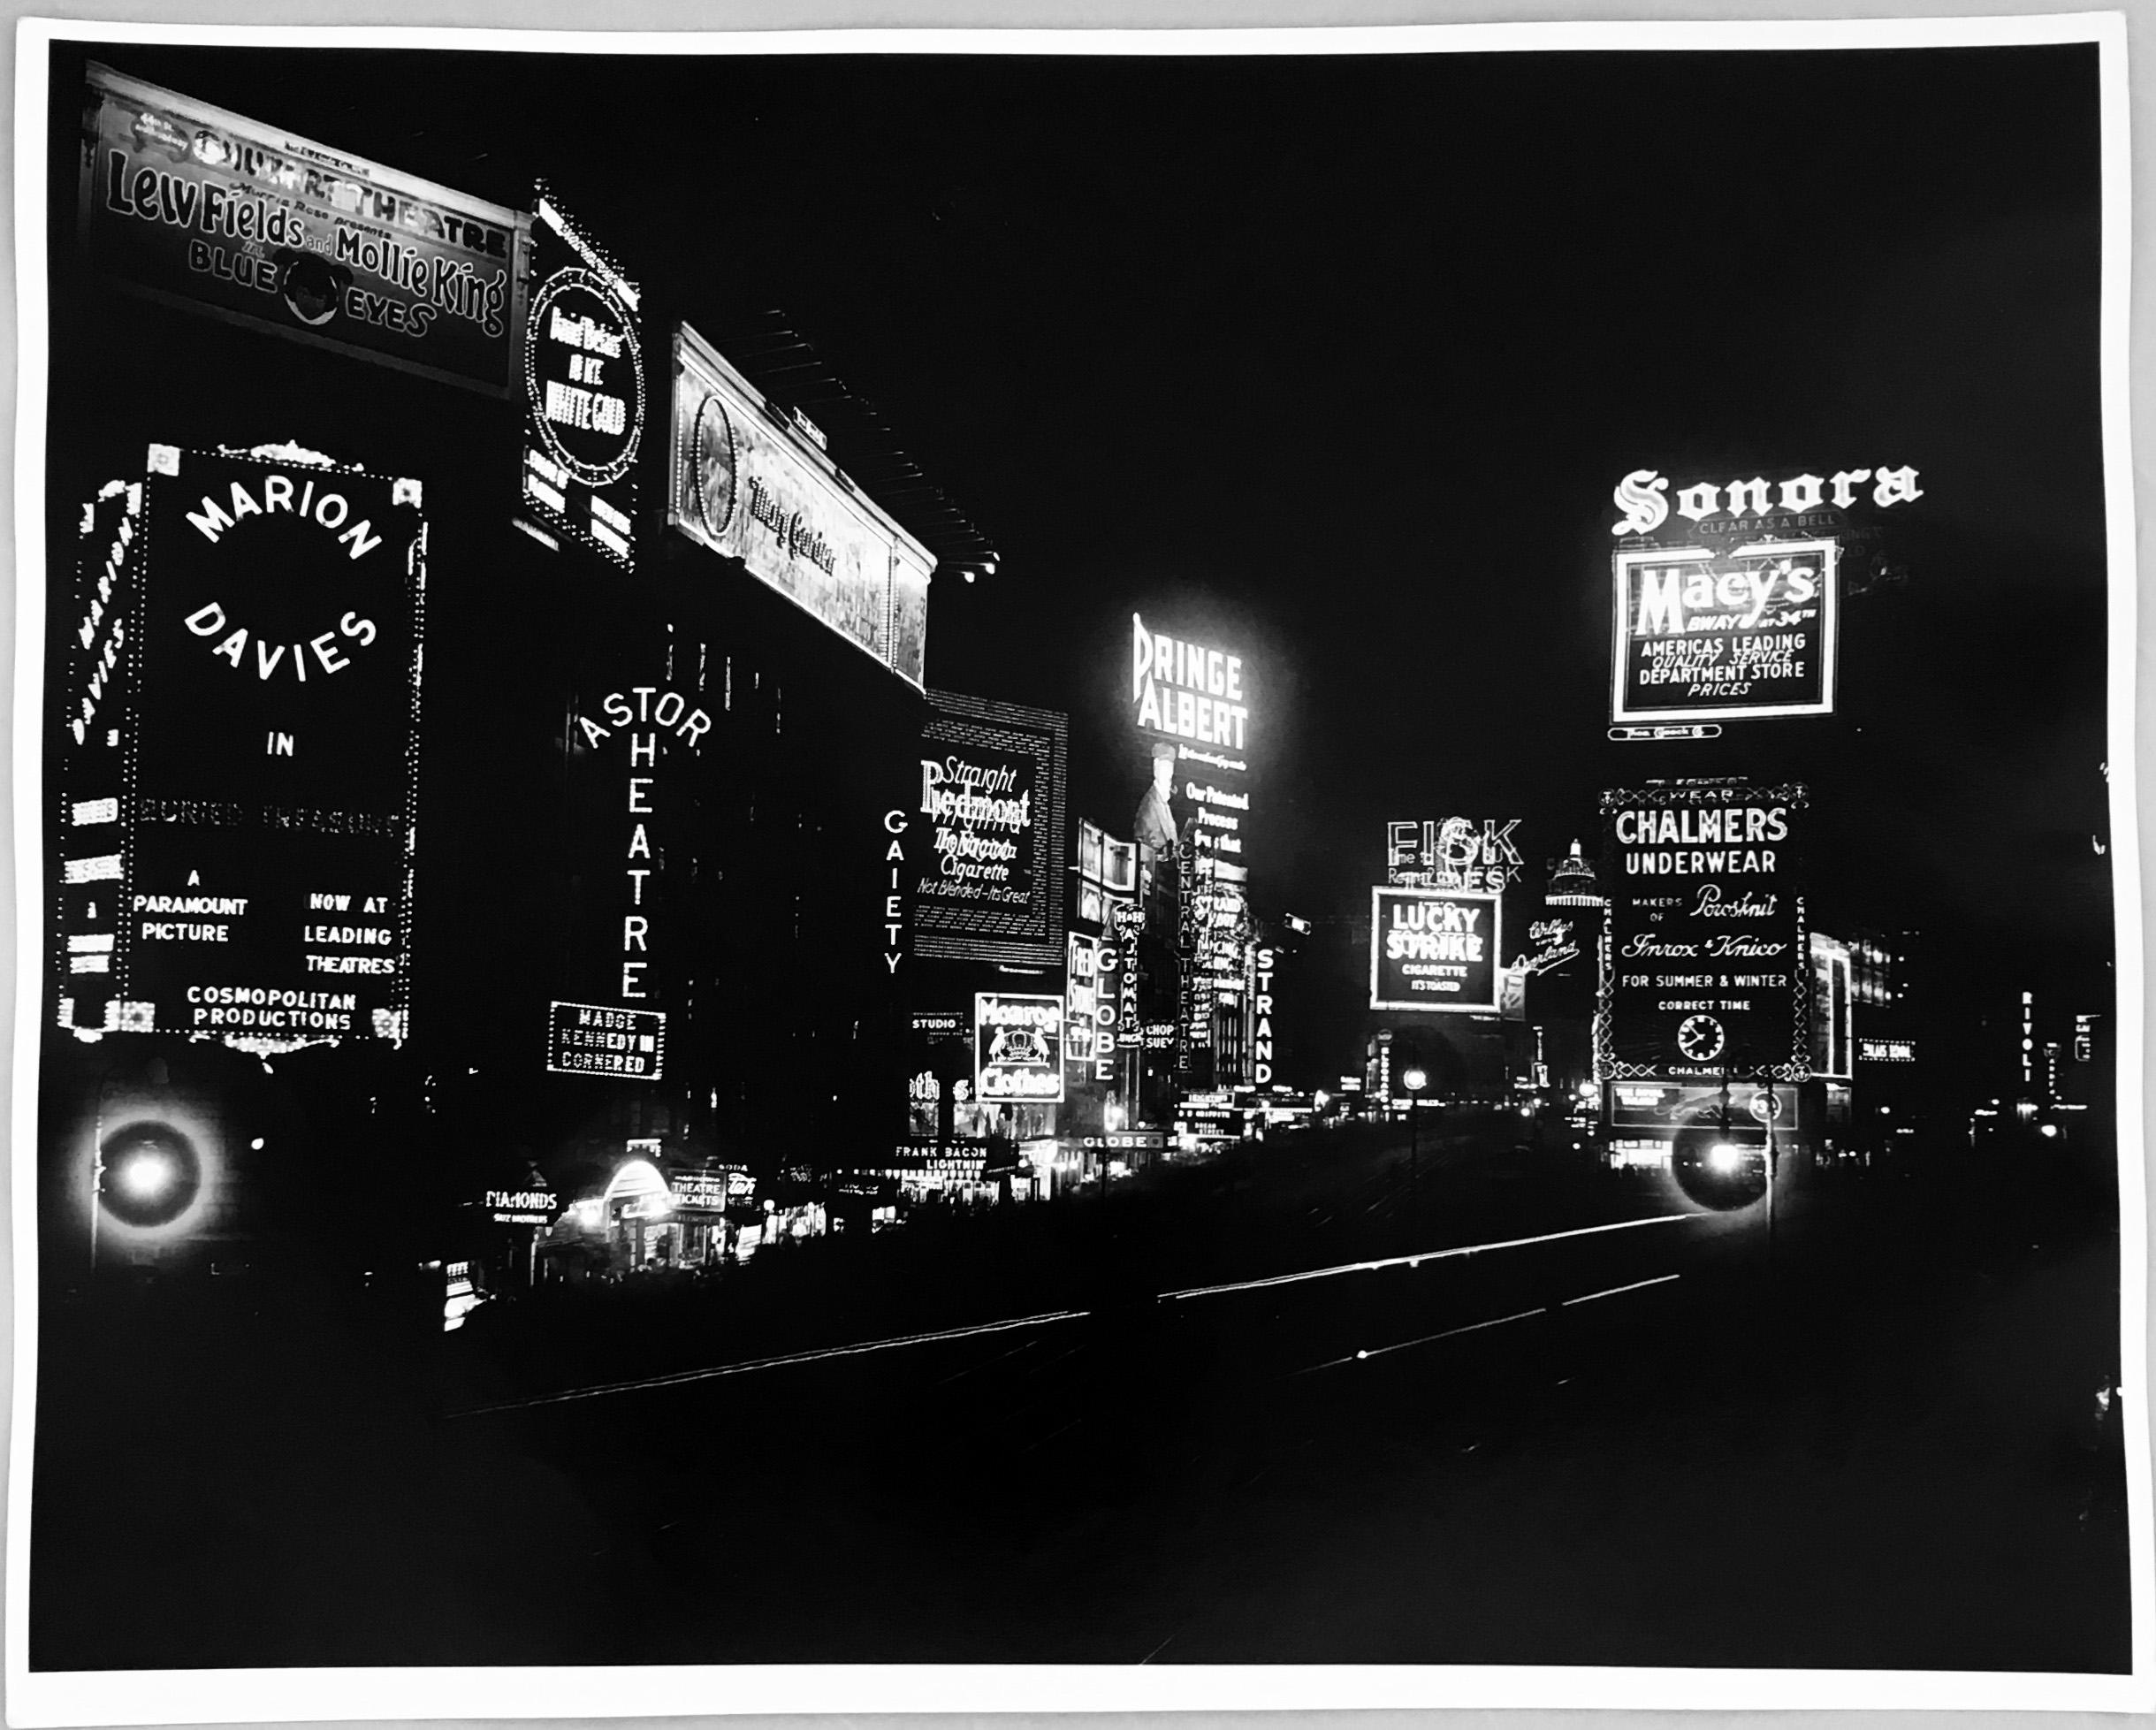 Manhattan's Time Square at night photographed, circa mid-1930s

Vintage original gelatin silver print, printed circa late-1950s
Dimensions: 16 x 20 inches 
Unsigned from unknown photographer
Very good condition with the exception of some mild